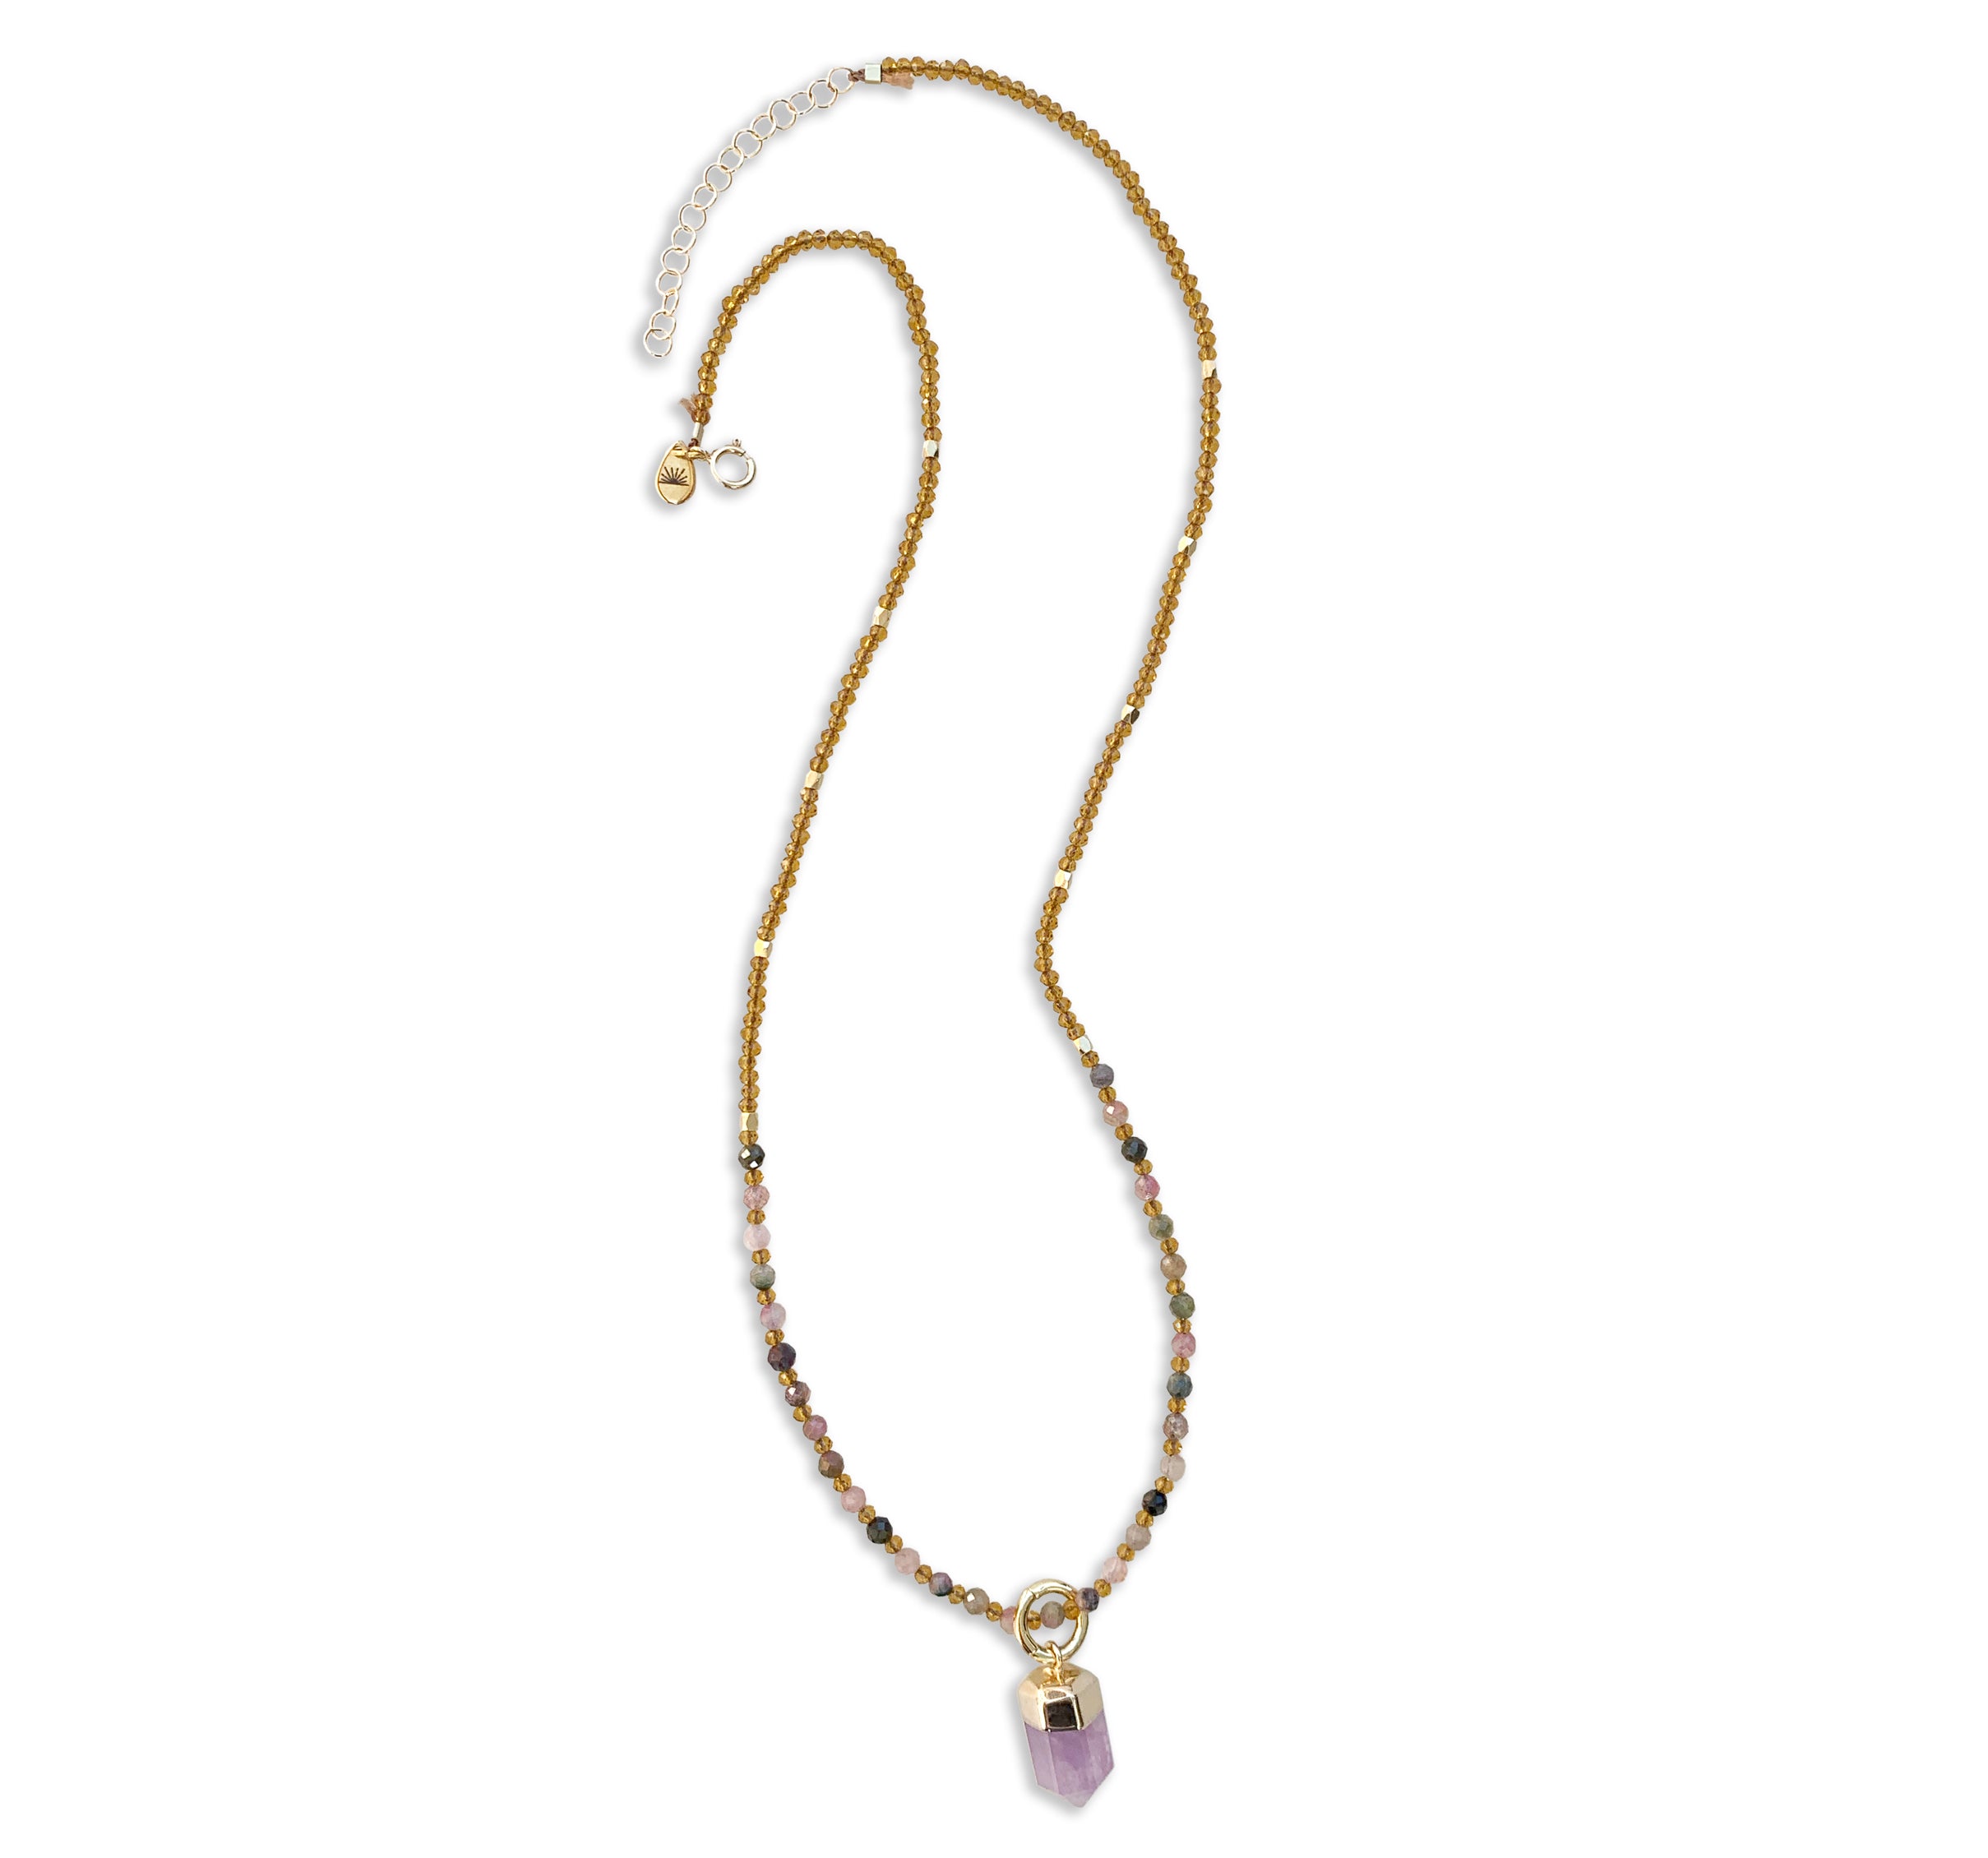 Cast-of-Stones-Tourmaline-Necklace-with-Amethyst-Crystal-Point-Charm